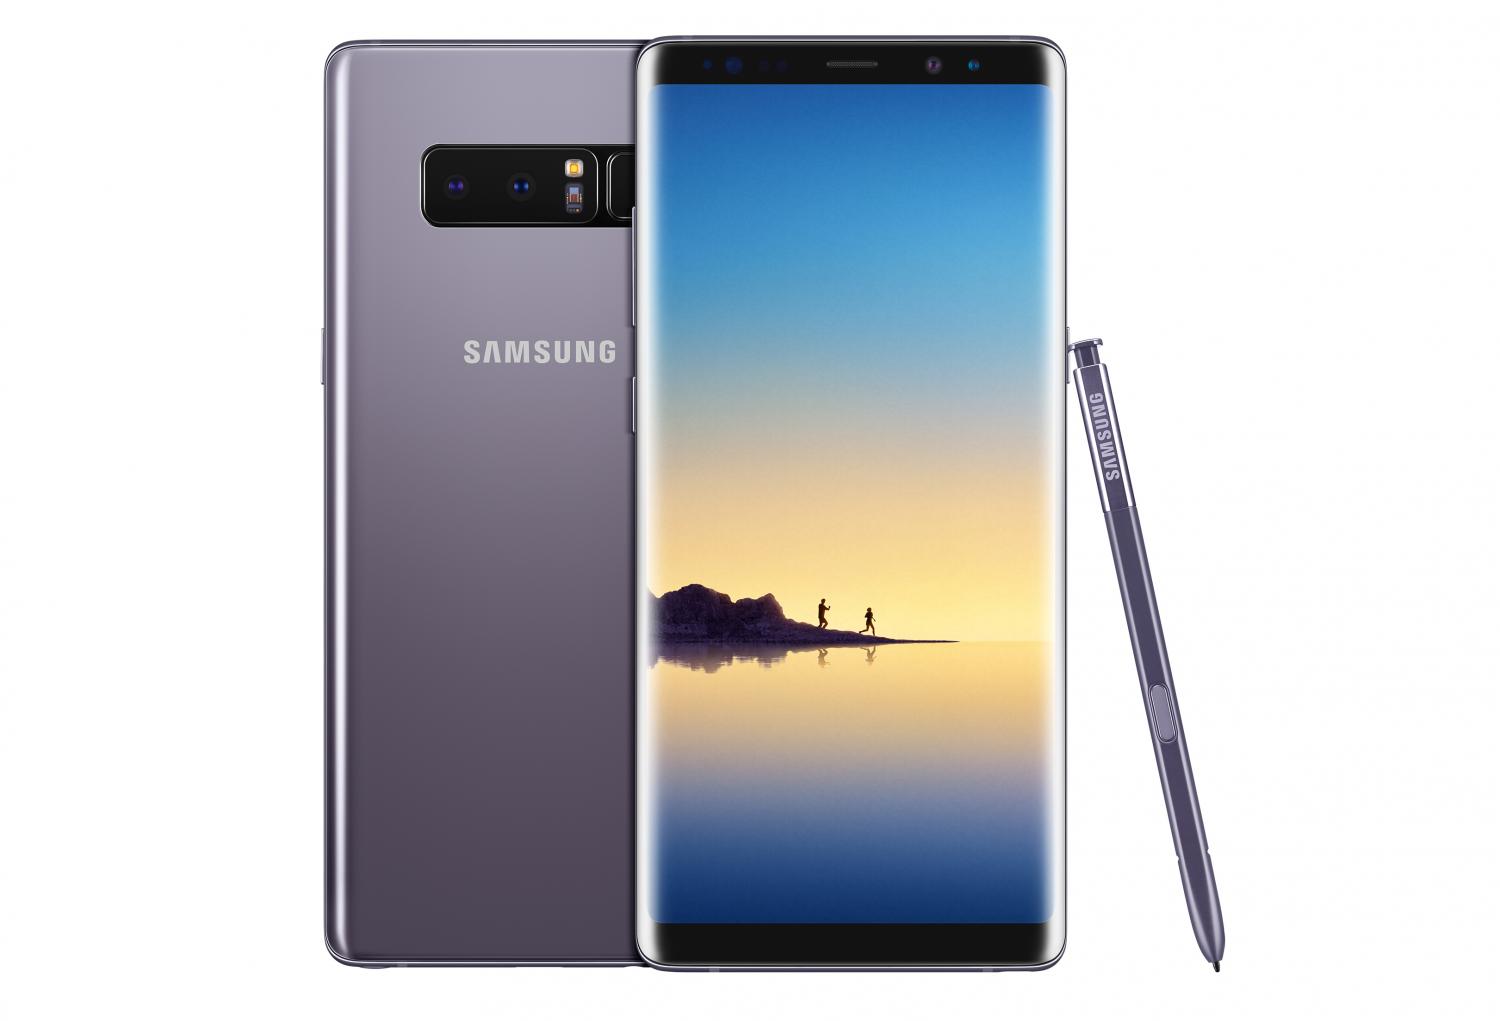 Geit Tulpen Veronderstellen Review: Samsung's Galaxy Note 8 is the phone Note 7 users have been waiting  for